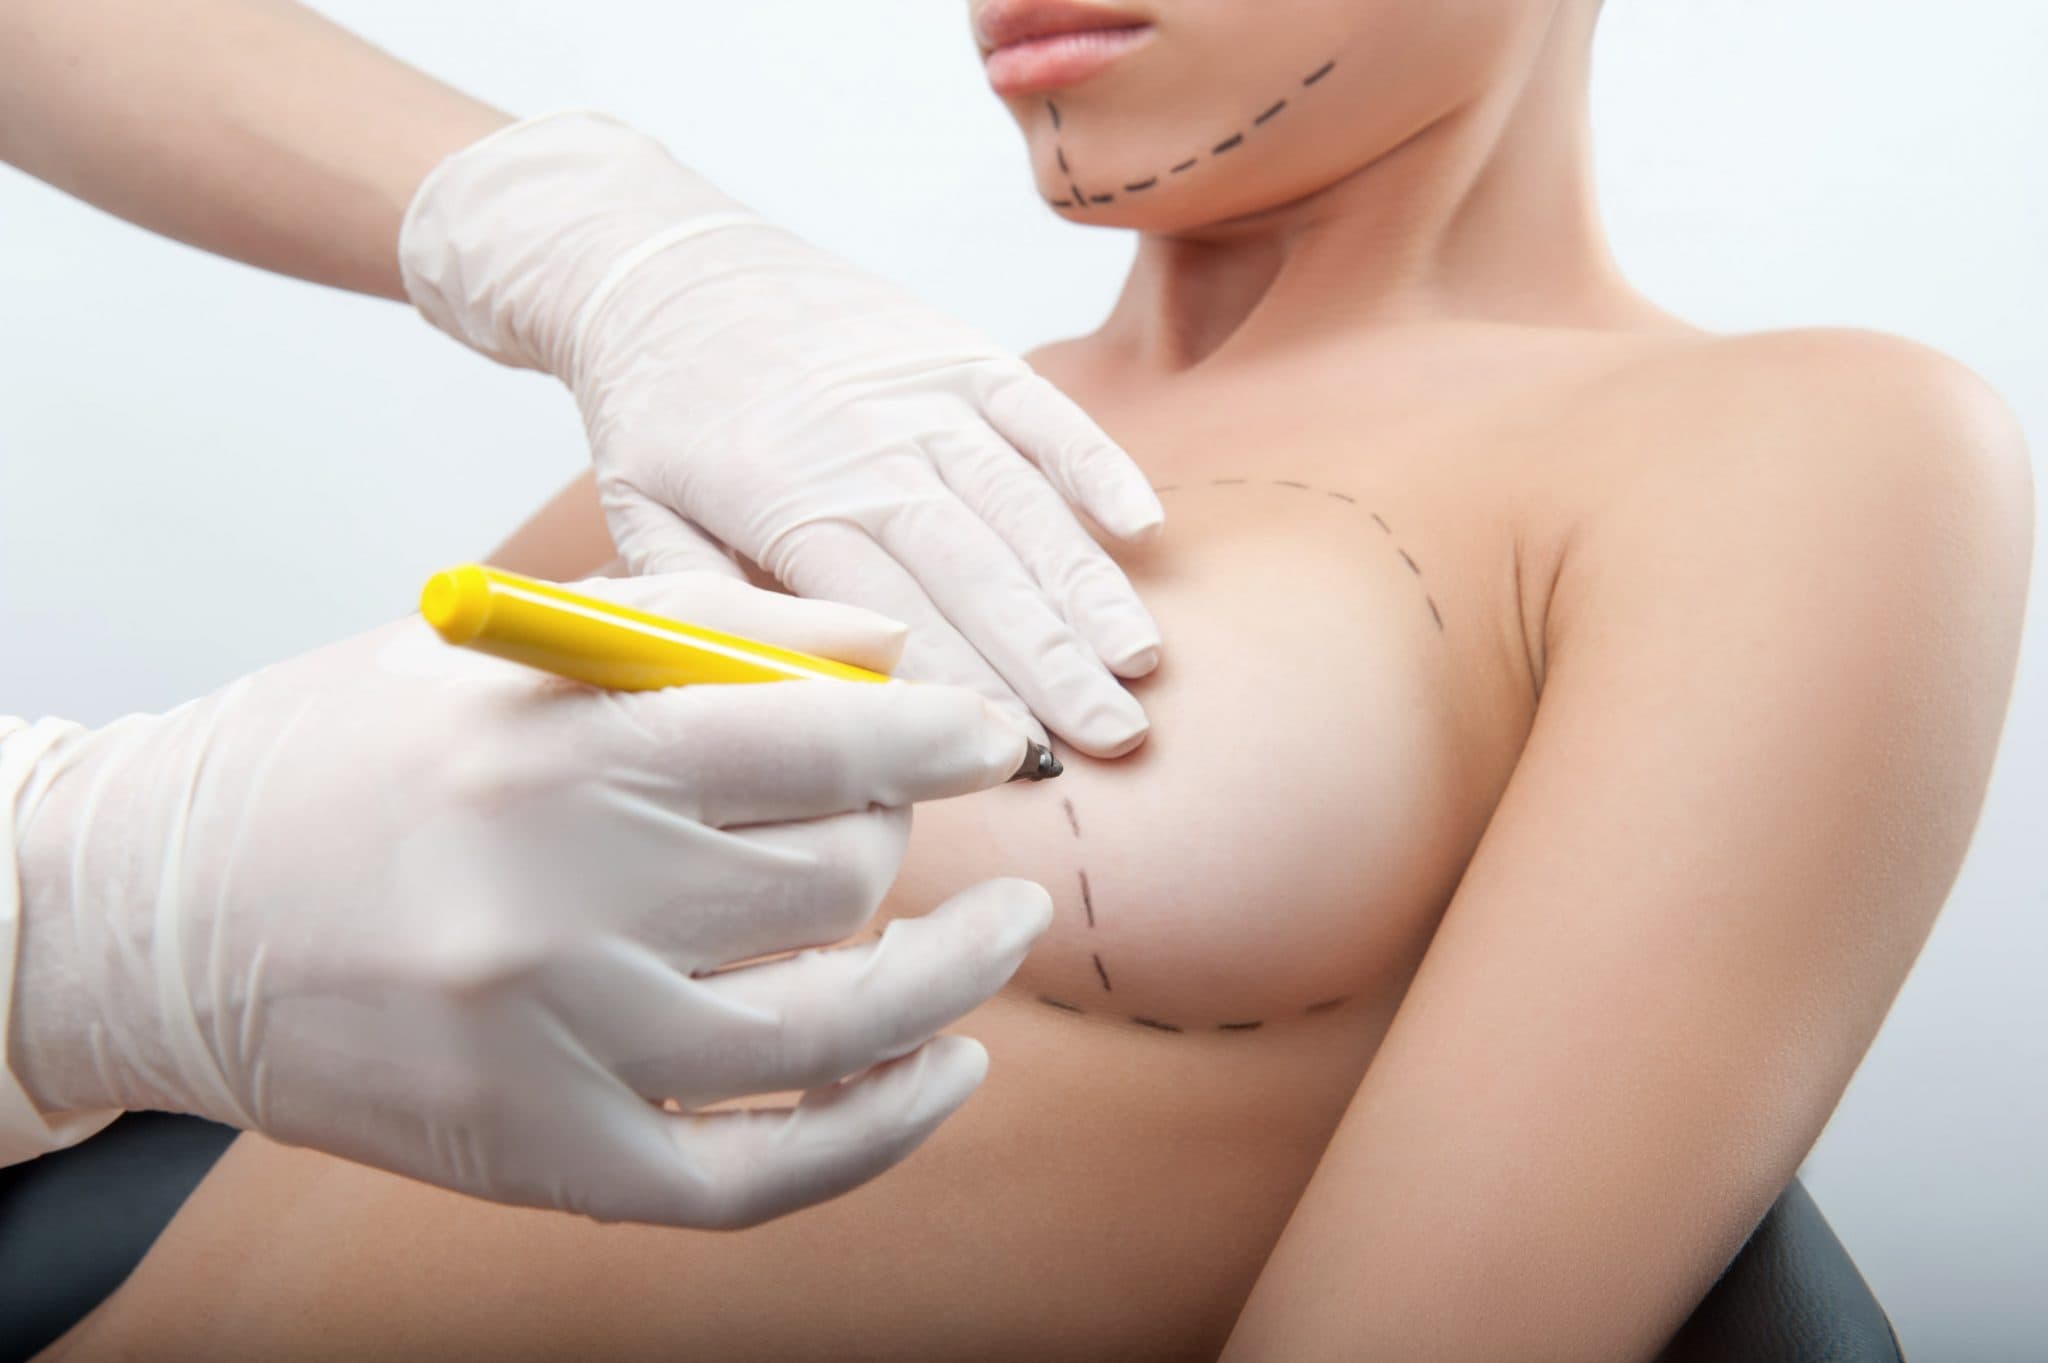 How Can I Care for Scars After Plastic Surgery?